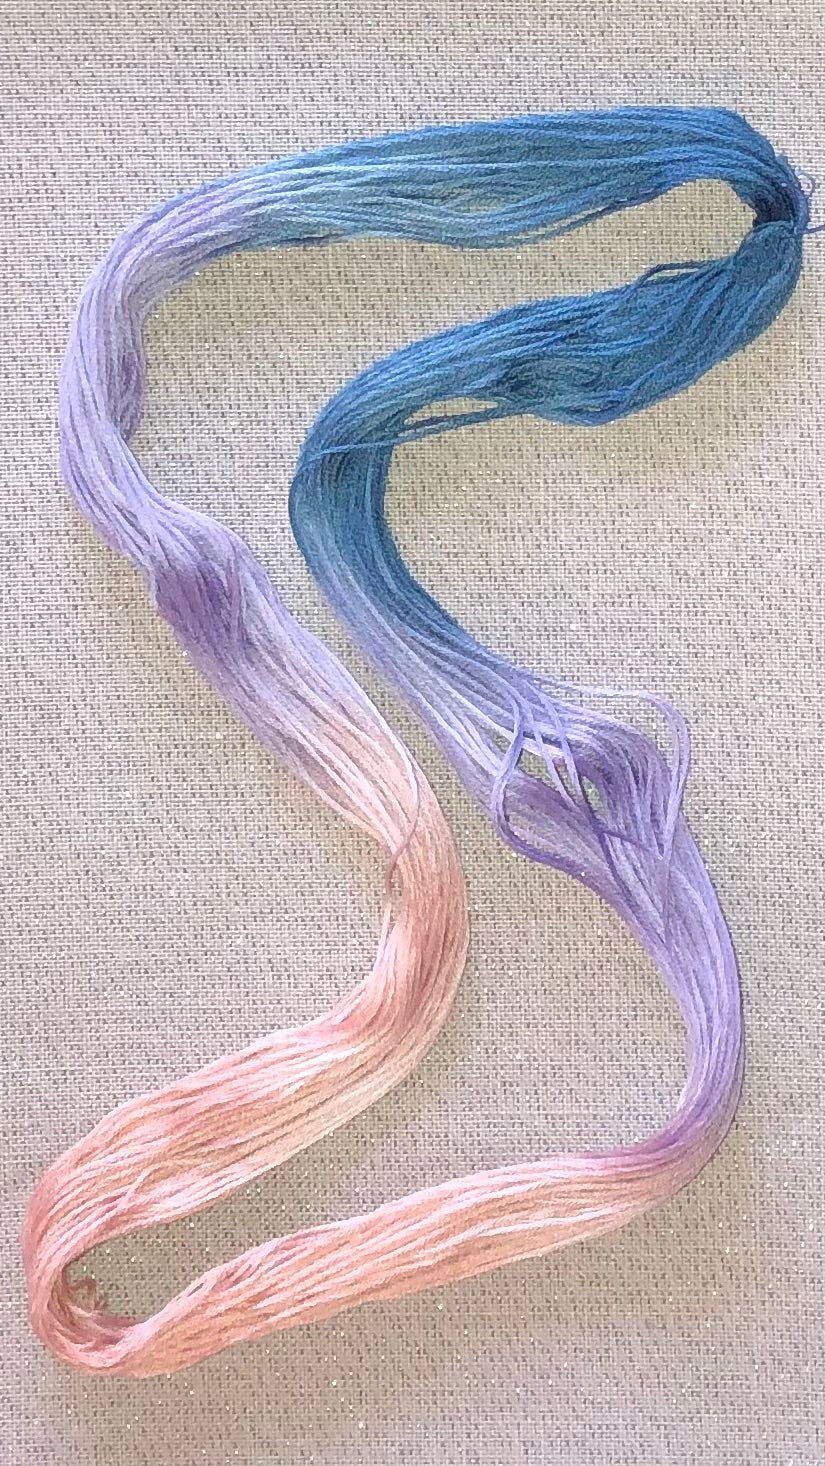 Cotton hand dyed floss - Daybreak - Dyeing for Cross Stitch